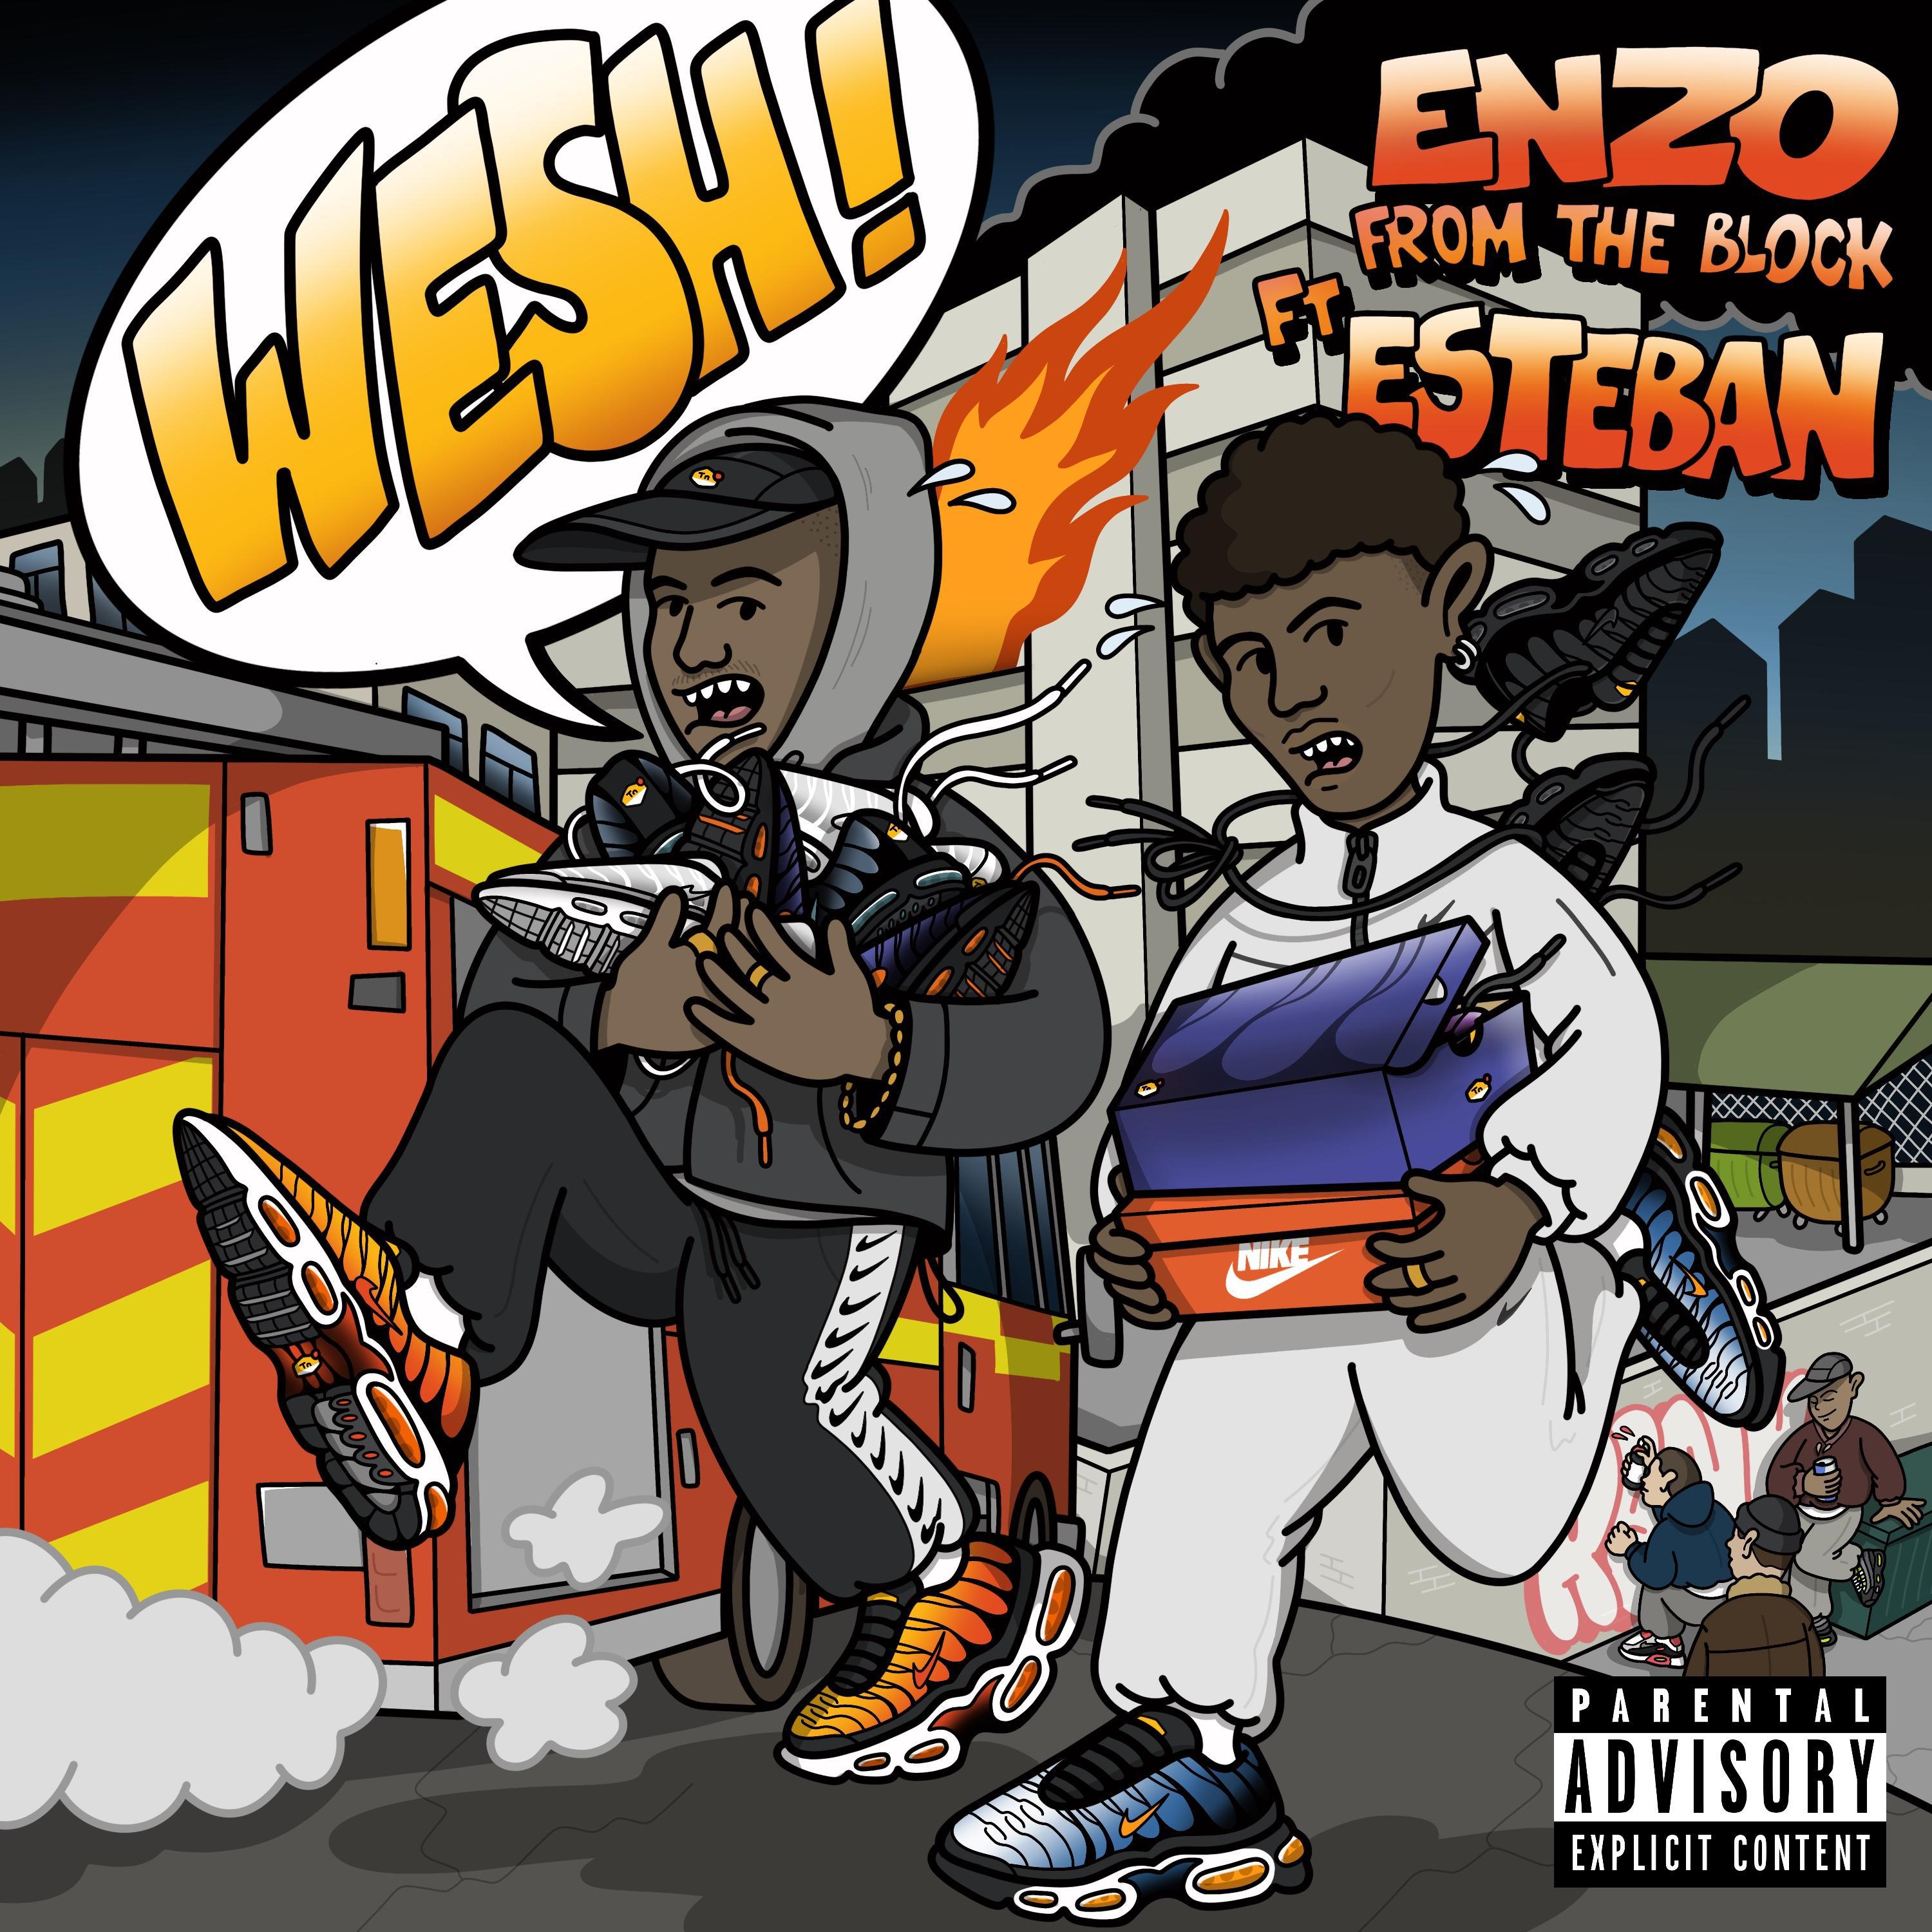 Enzo from the Block - WESH (feat. Esteban)